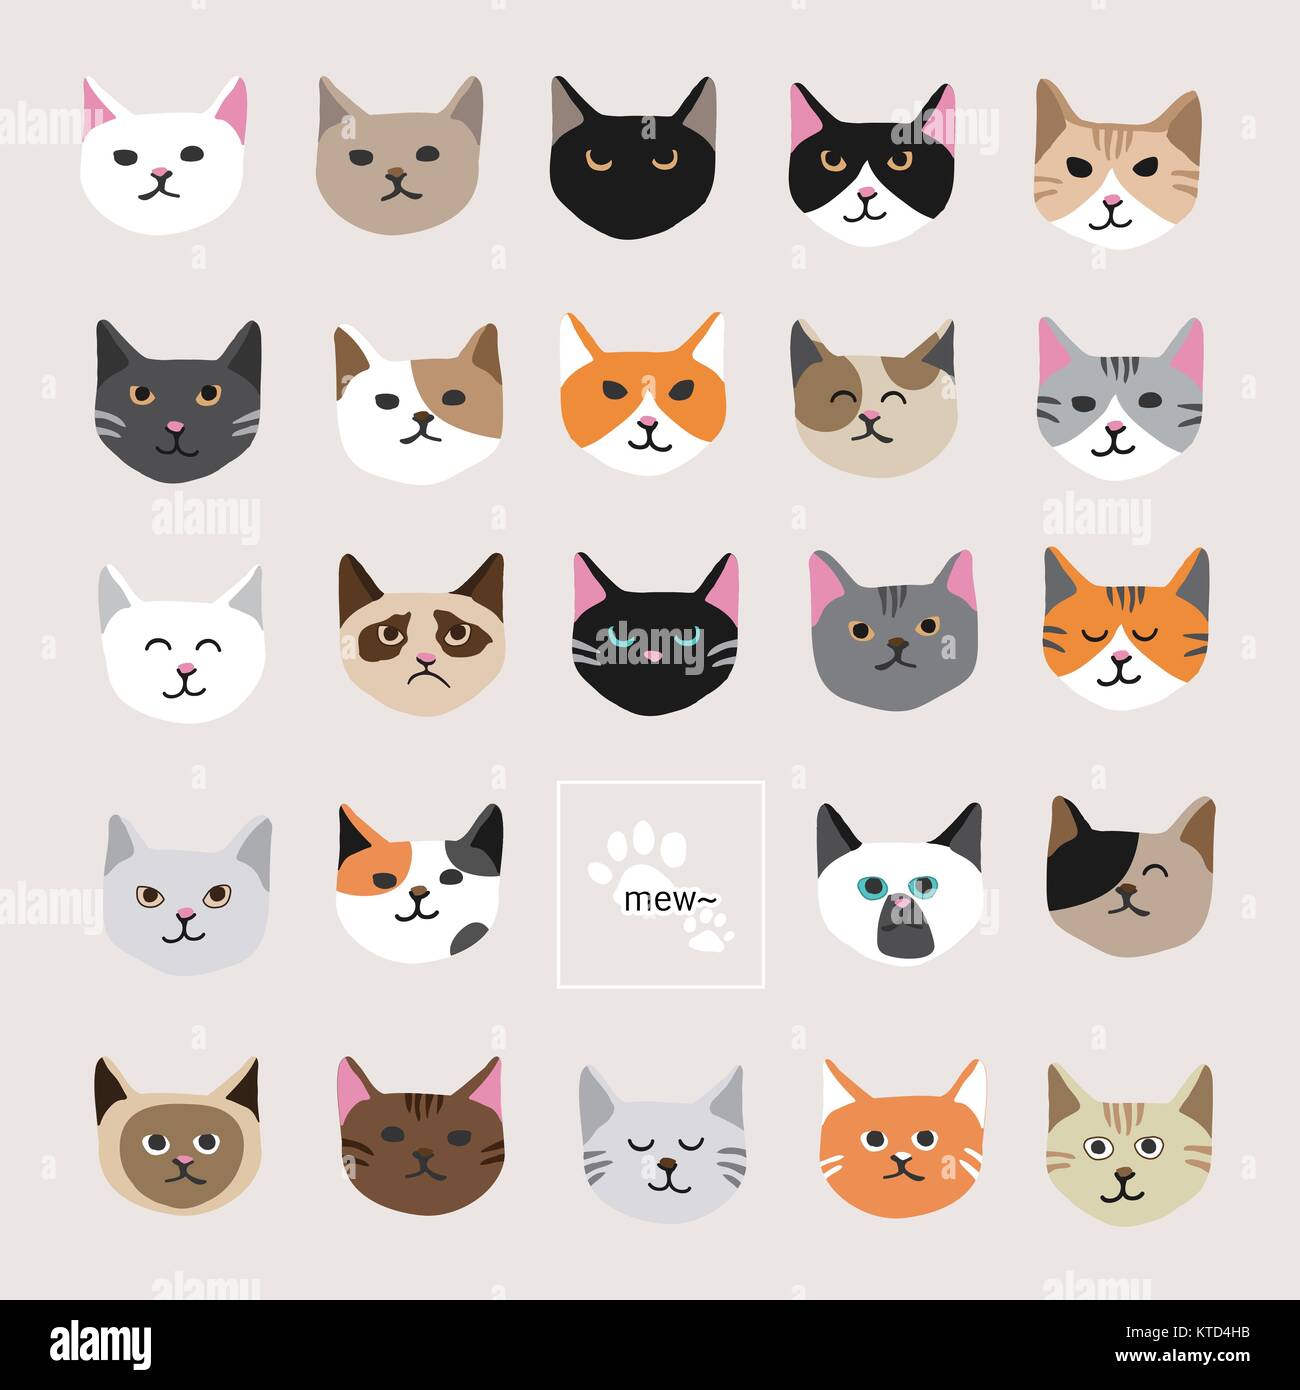 Cute kitty cat face collection. Stock Vector